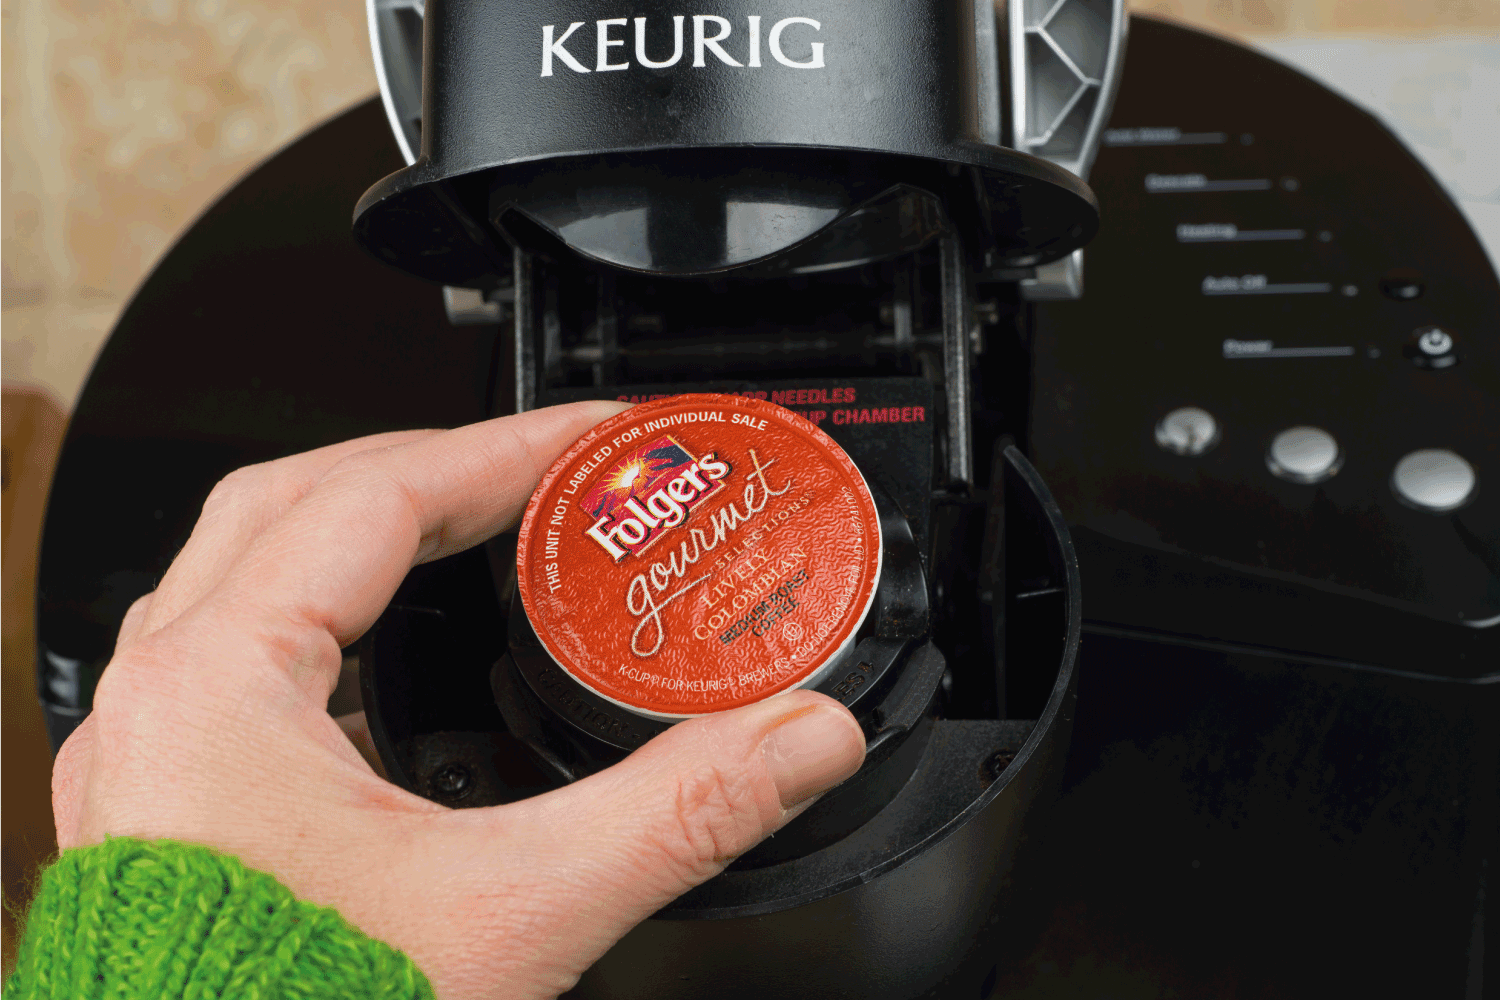 woman inserting single-serve K-cup Foldger's coffee into a Keurig coffee maker.